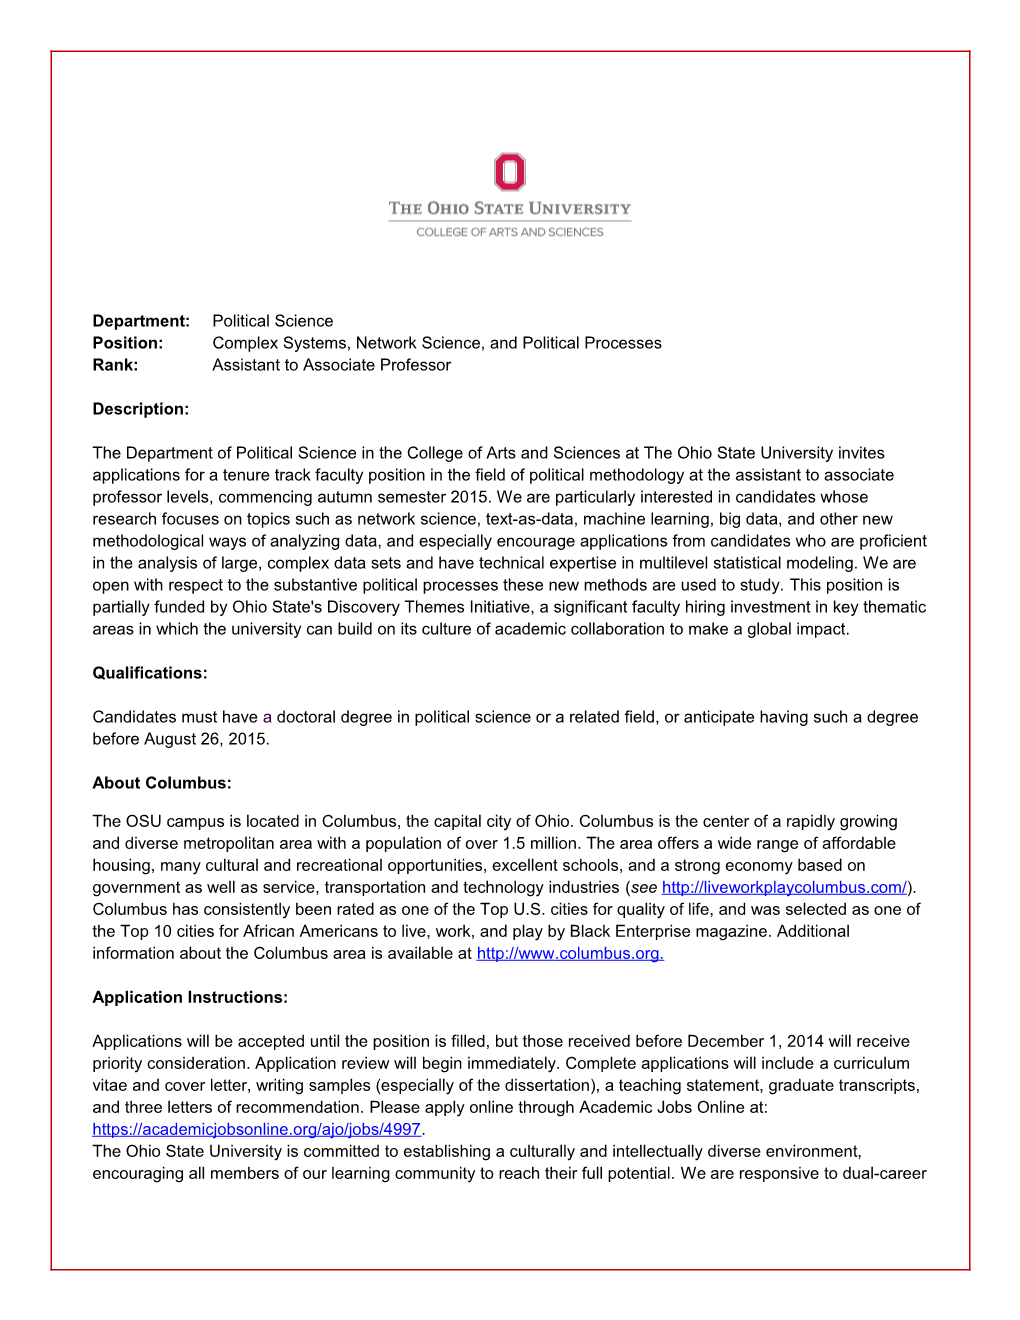 Position:Complex Systems, Network Science, and Political Processes